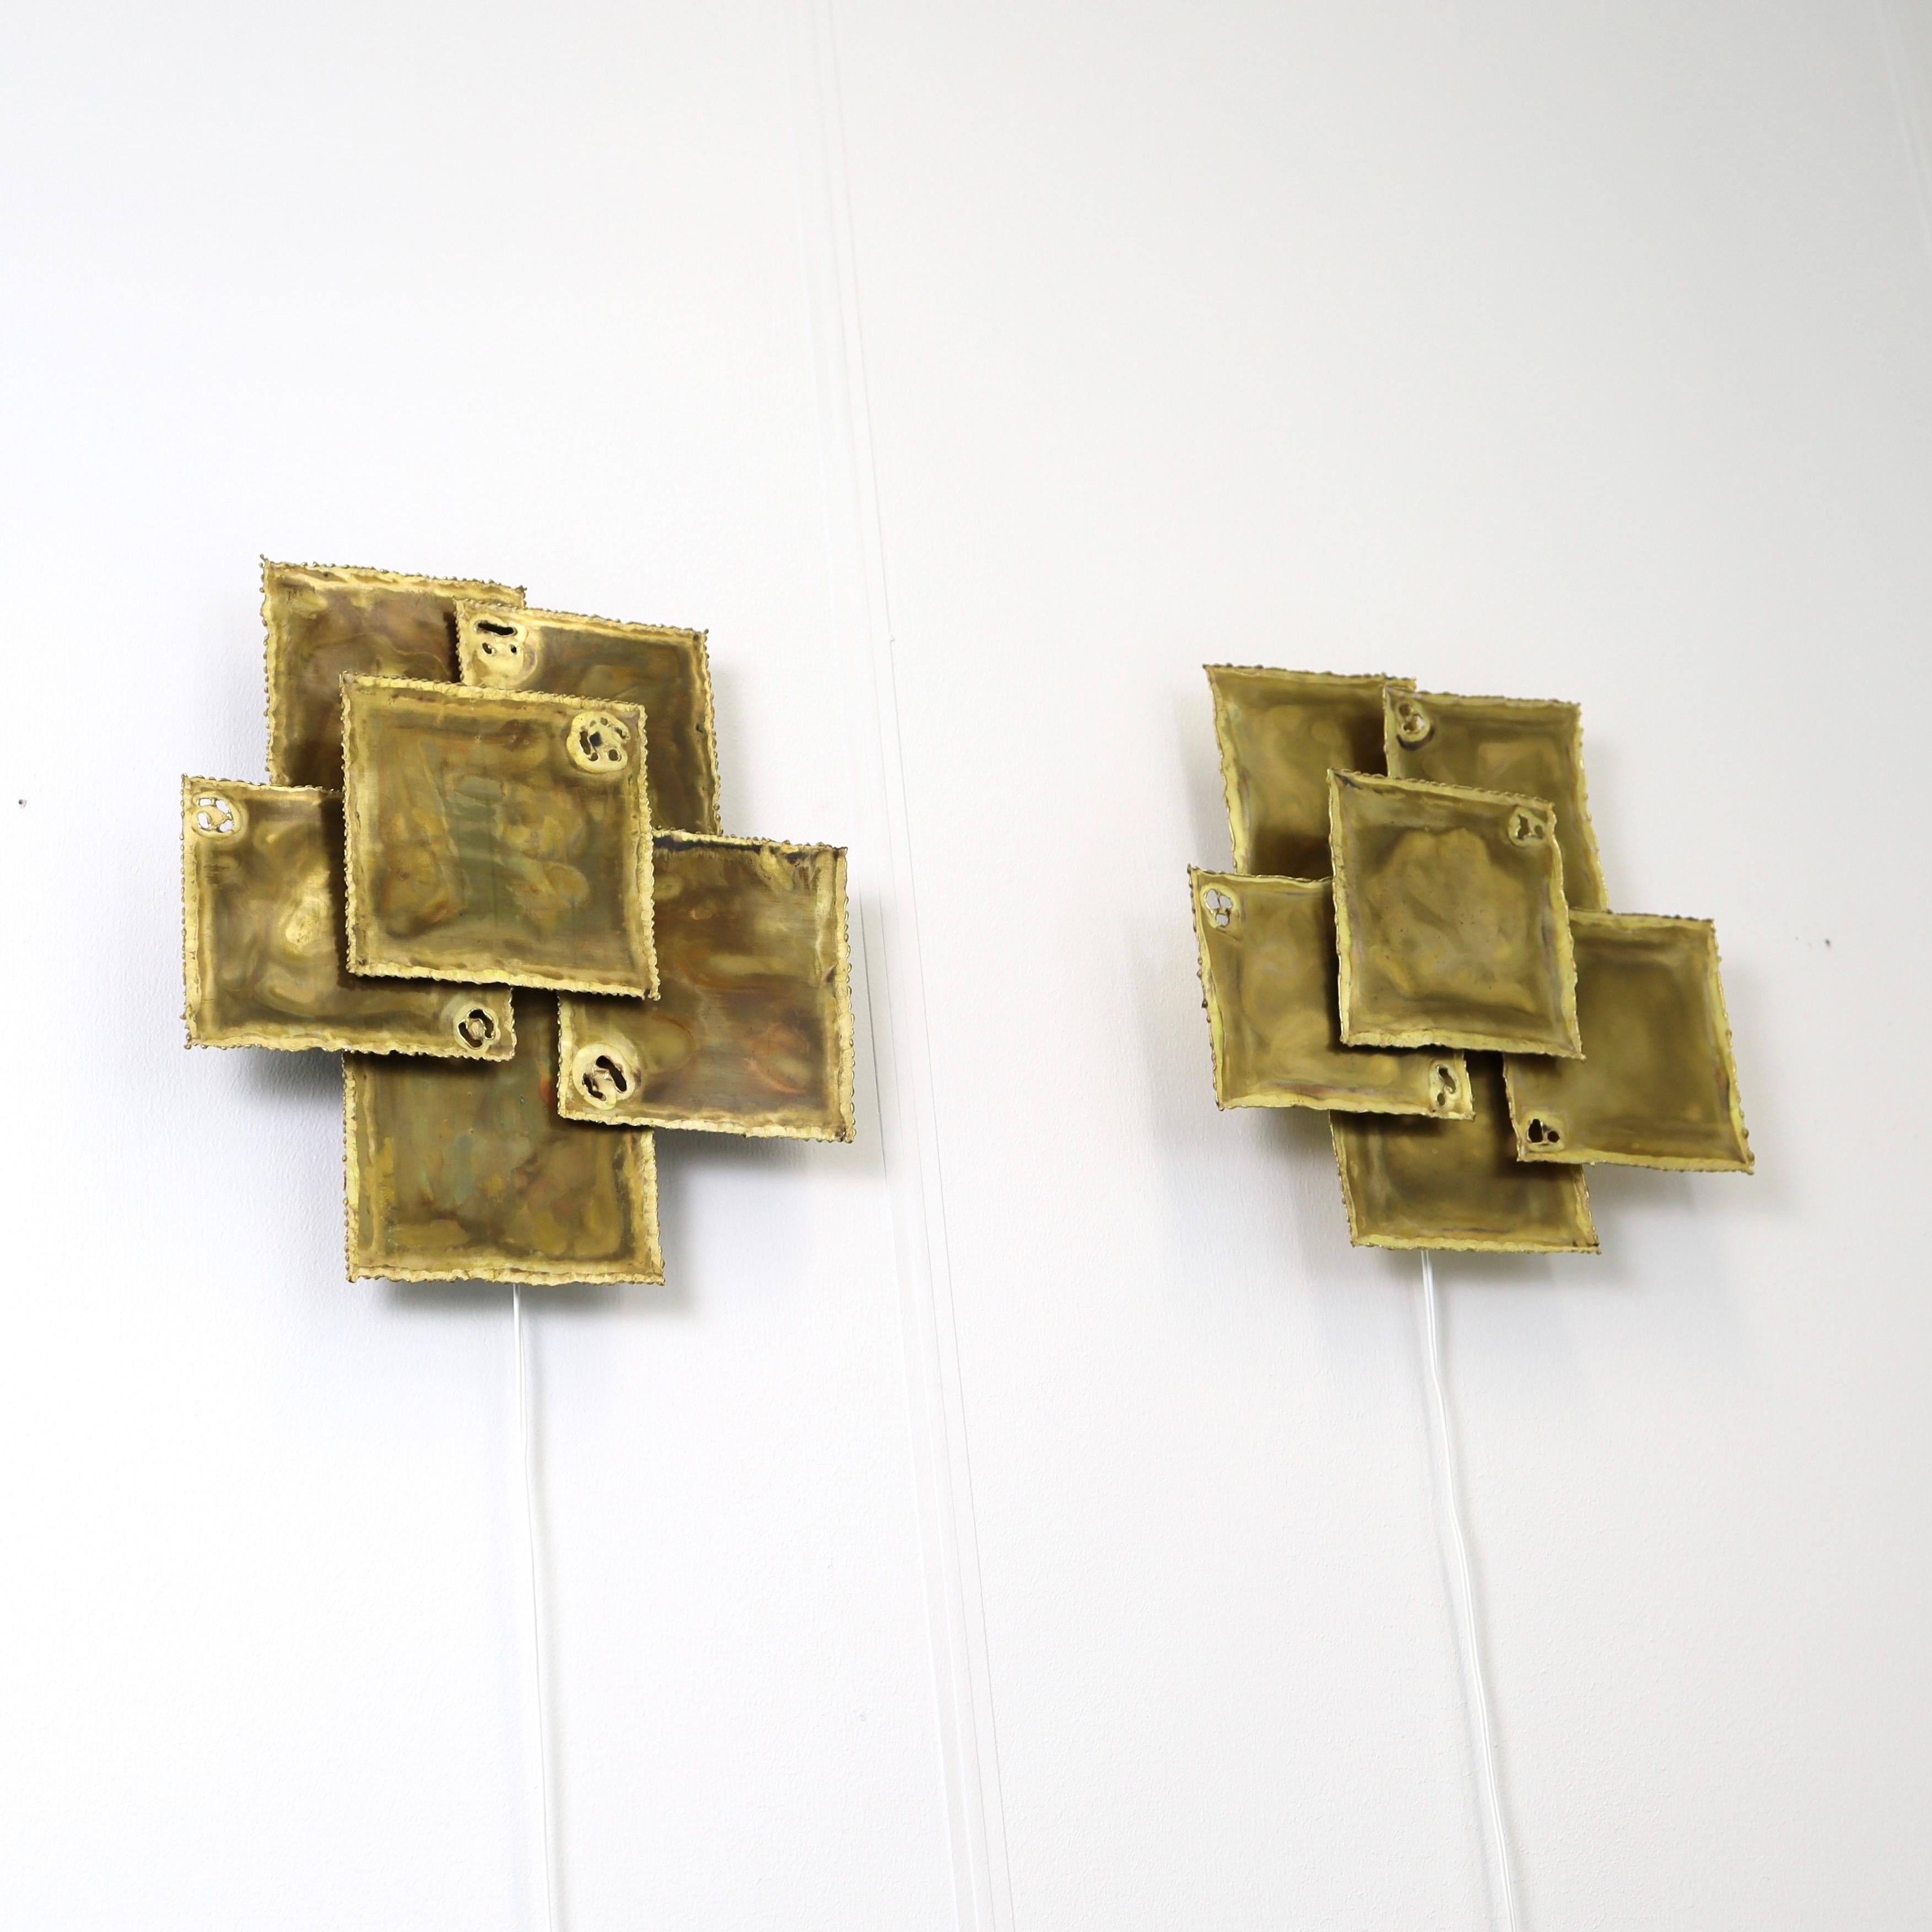 Danish Pair of Large Brass Wall Lamps by Svend Aage Holm Sorensen, 1960s, Denmark For Sale